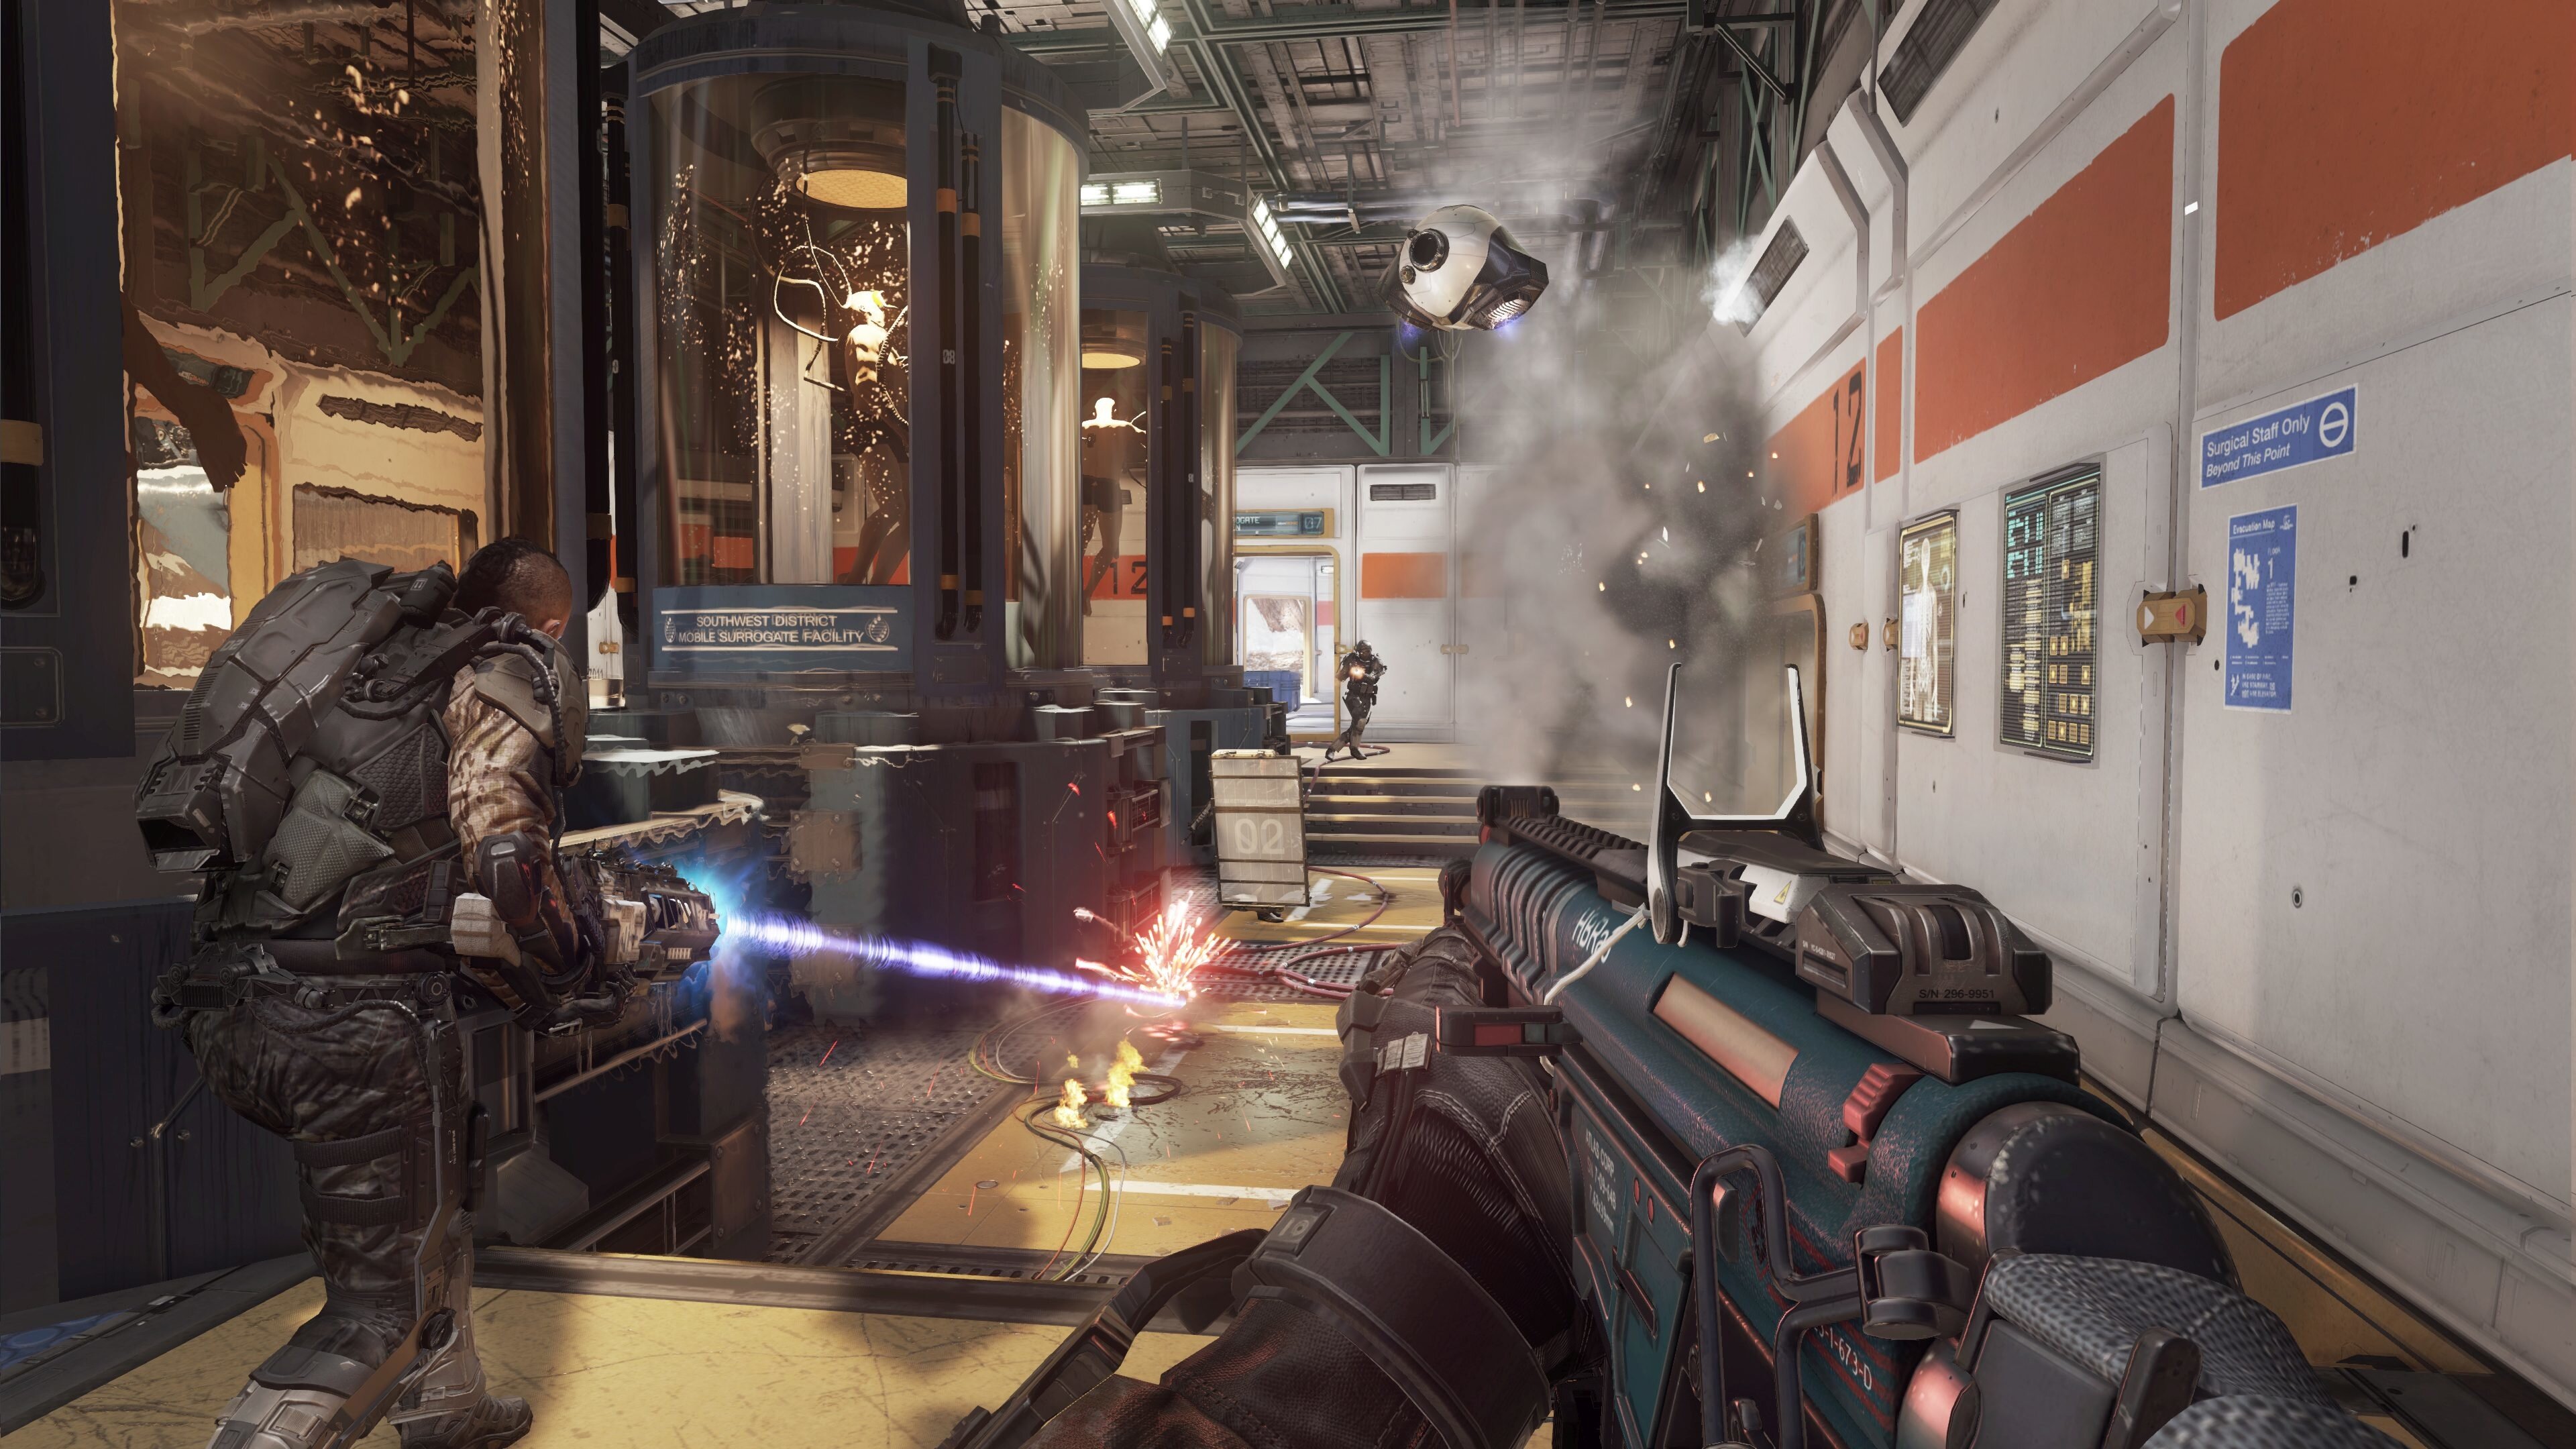 Call of Duty: Advanced Warfare Game of the Year Game of  - Best Buy